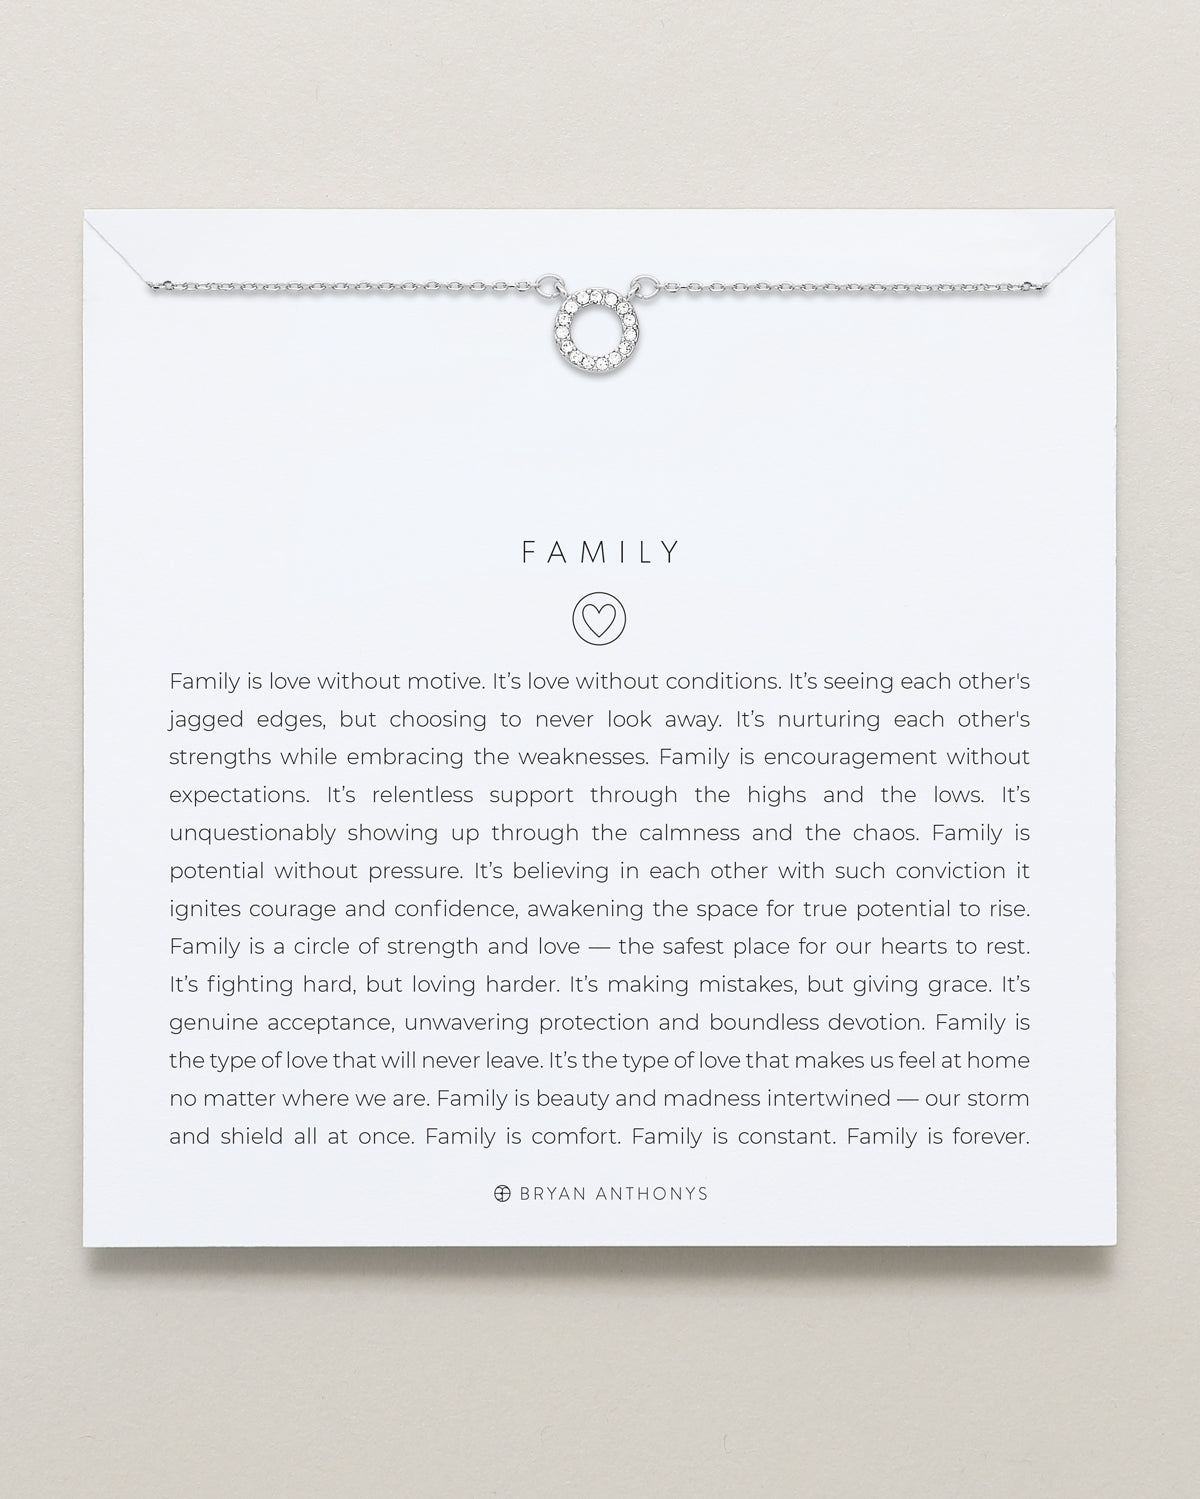 Bryan Anthonys Family Silver Necklace On Card